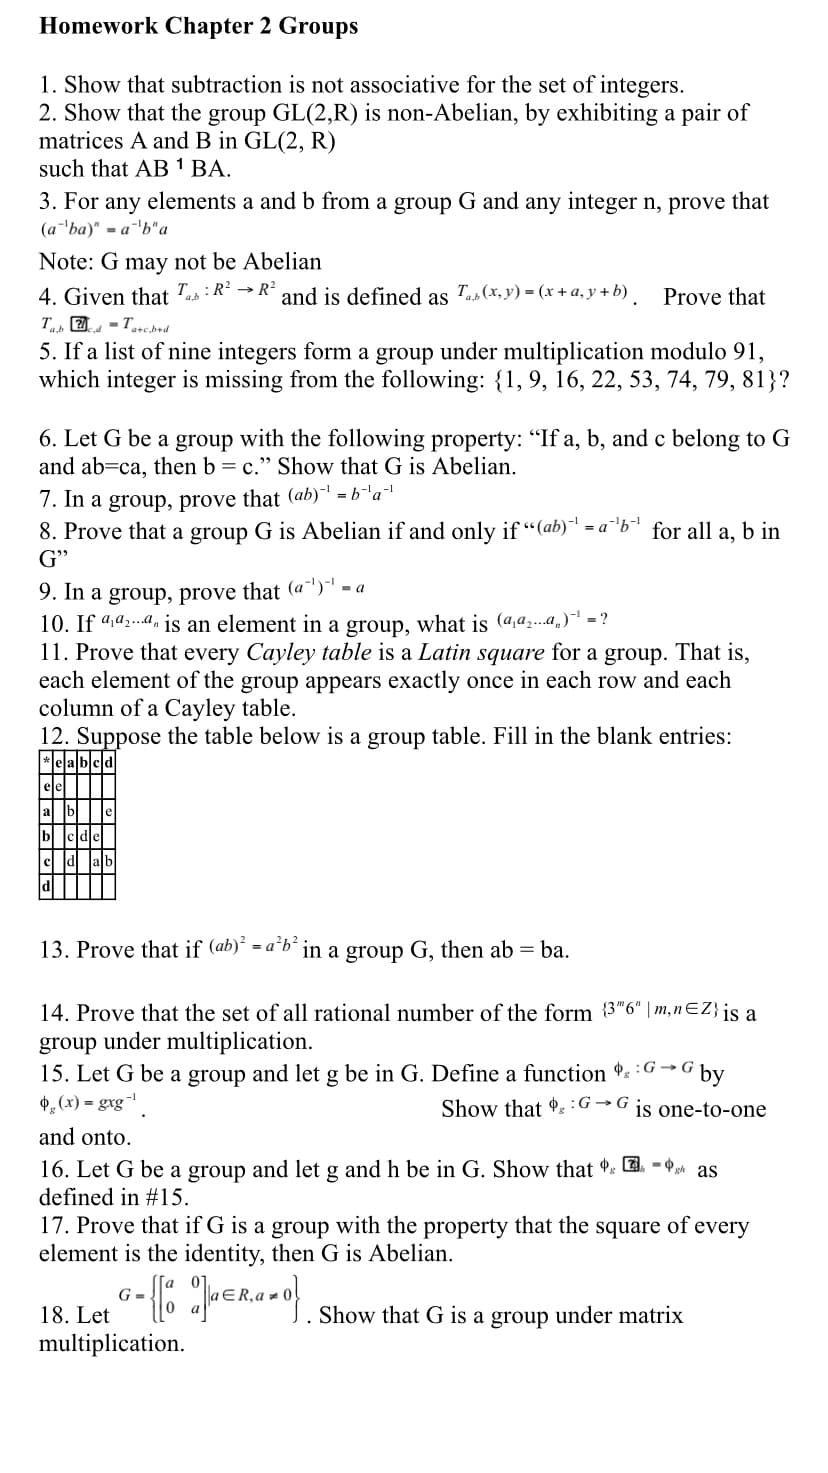 5. If a list of nine integers form a group under multiplication modulo 91,
which integer is missing from the following: {1, 9, 16, 22, 53, 74, 79, 81}?
